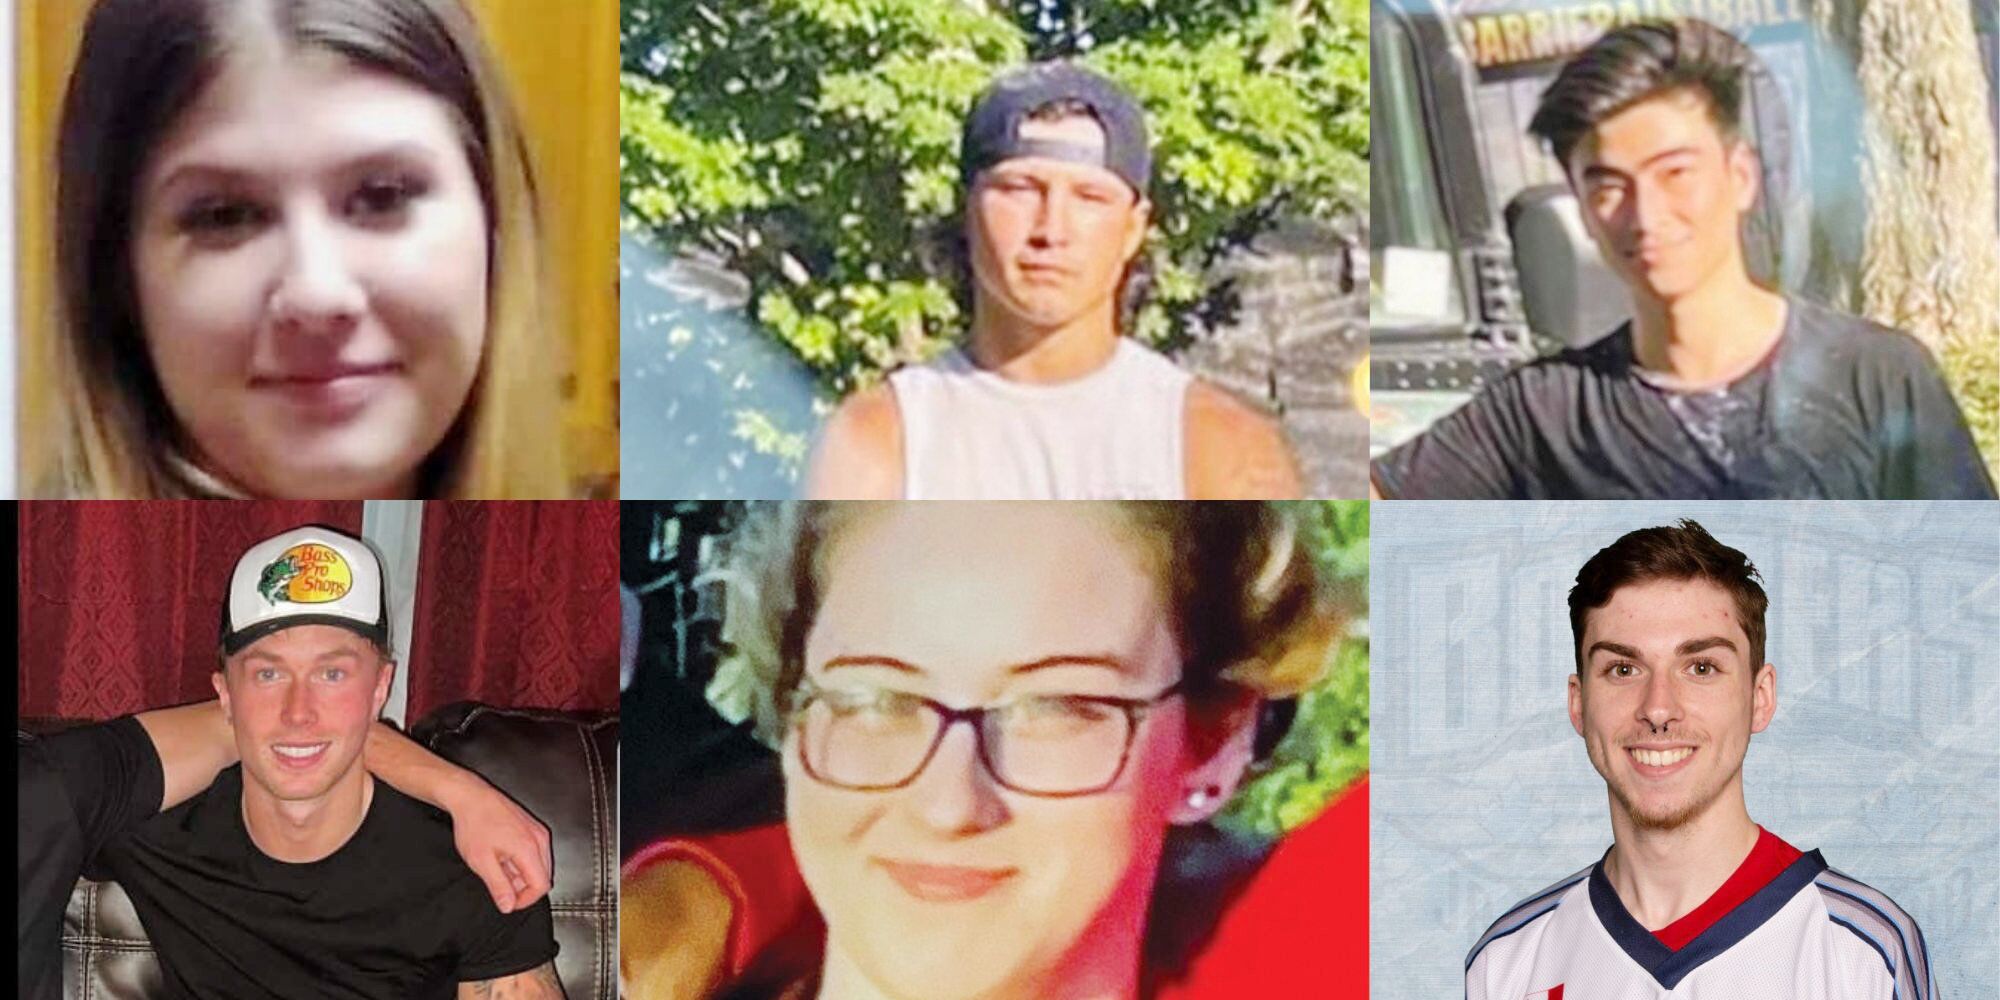 Had so much life ahead of them Barrie mourns six young adults killed in crash